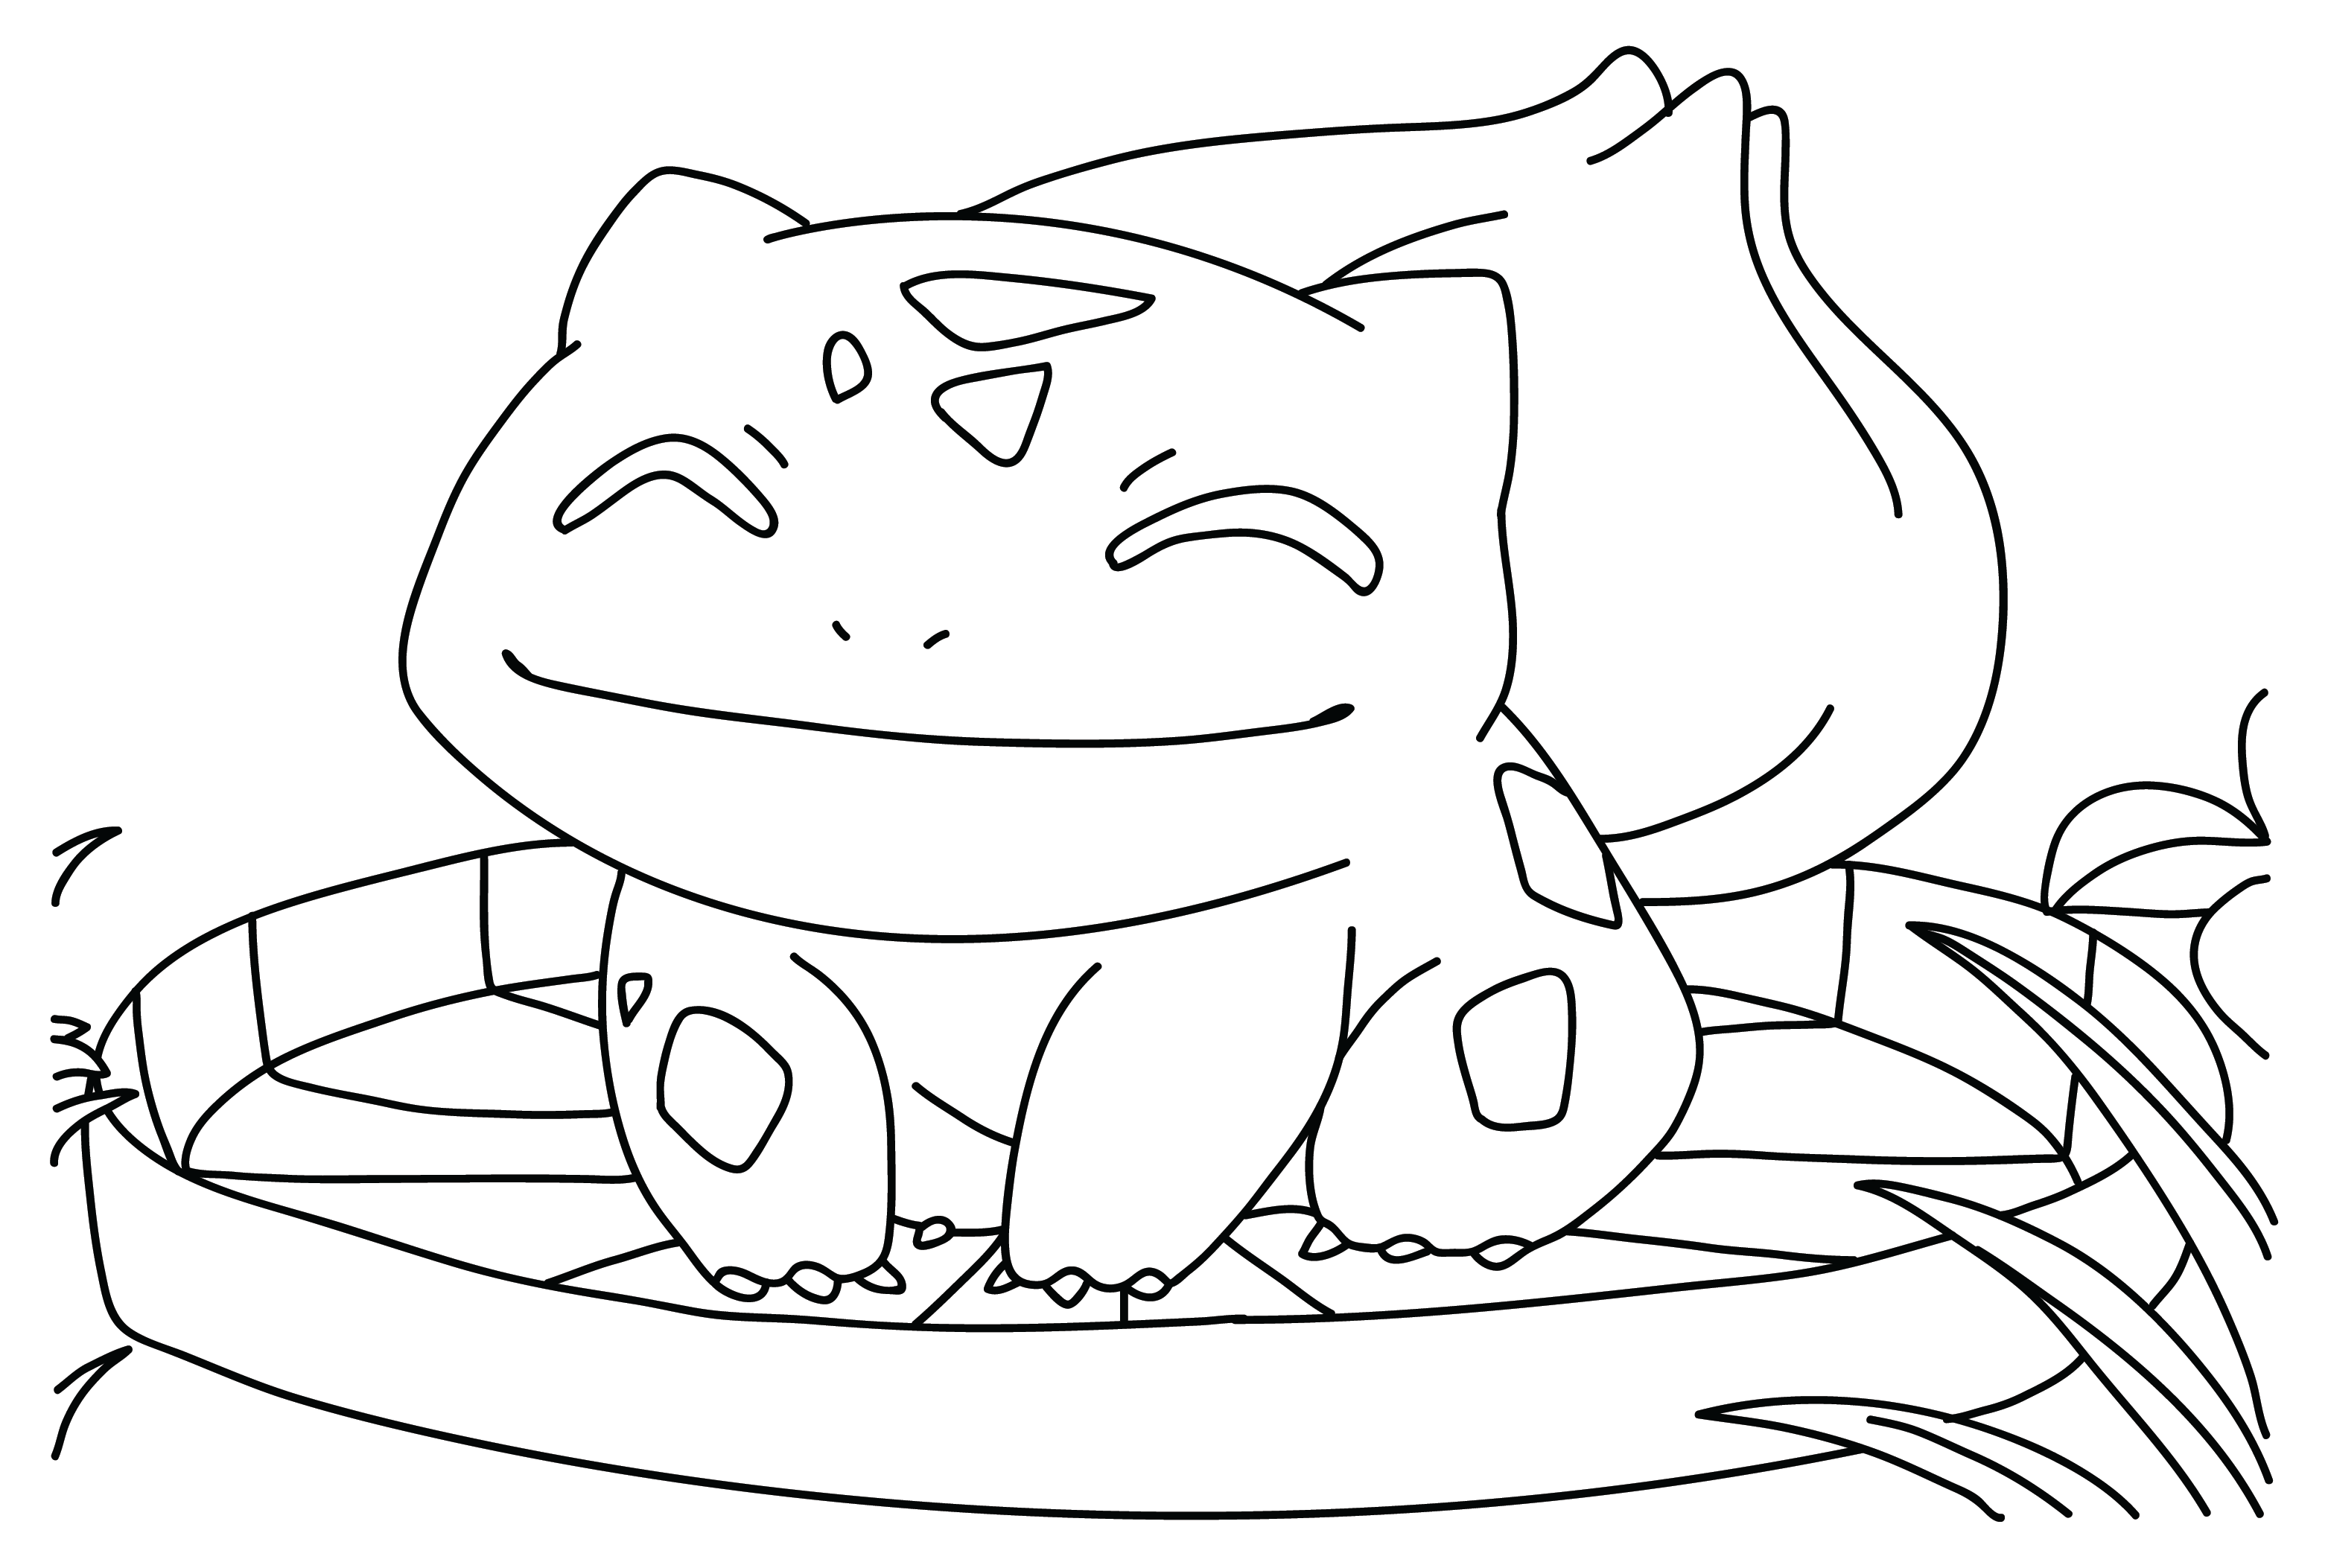 Coloring Page Pictures Pokemon Bulbasaur